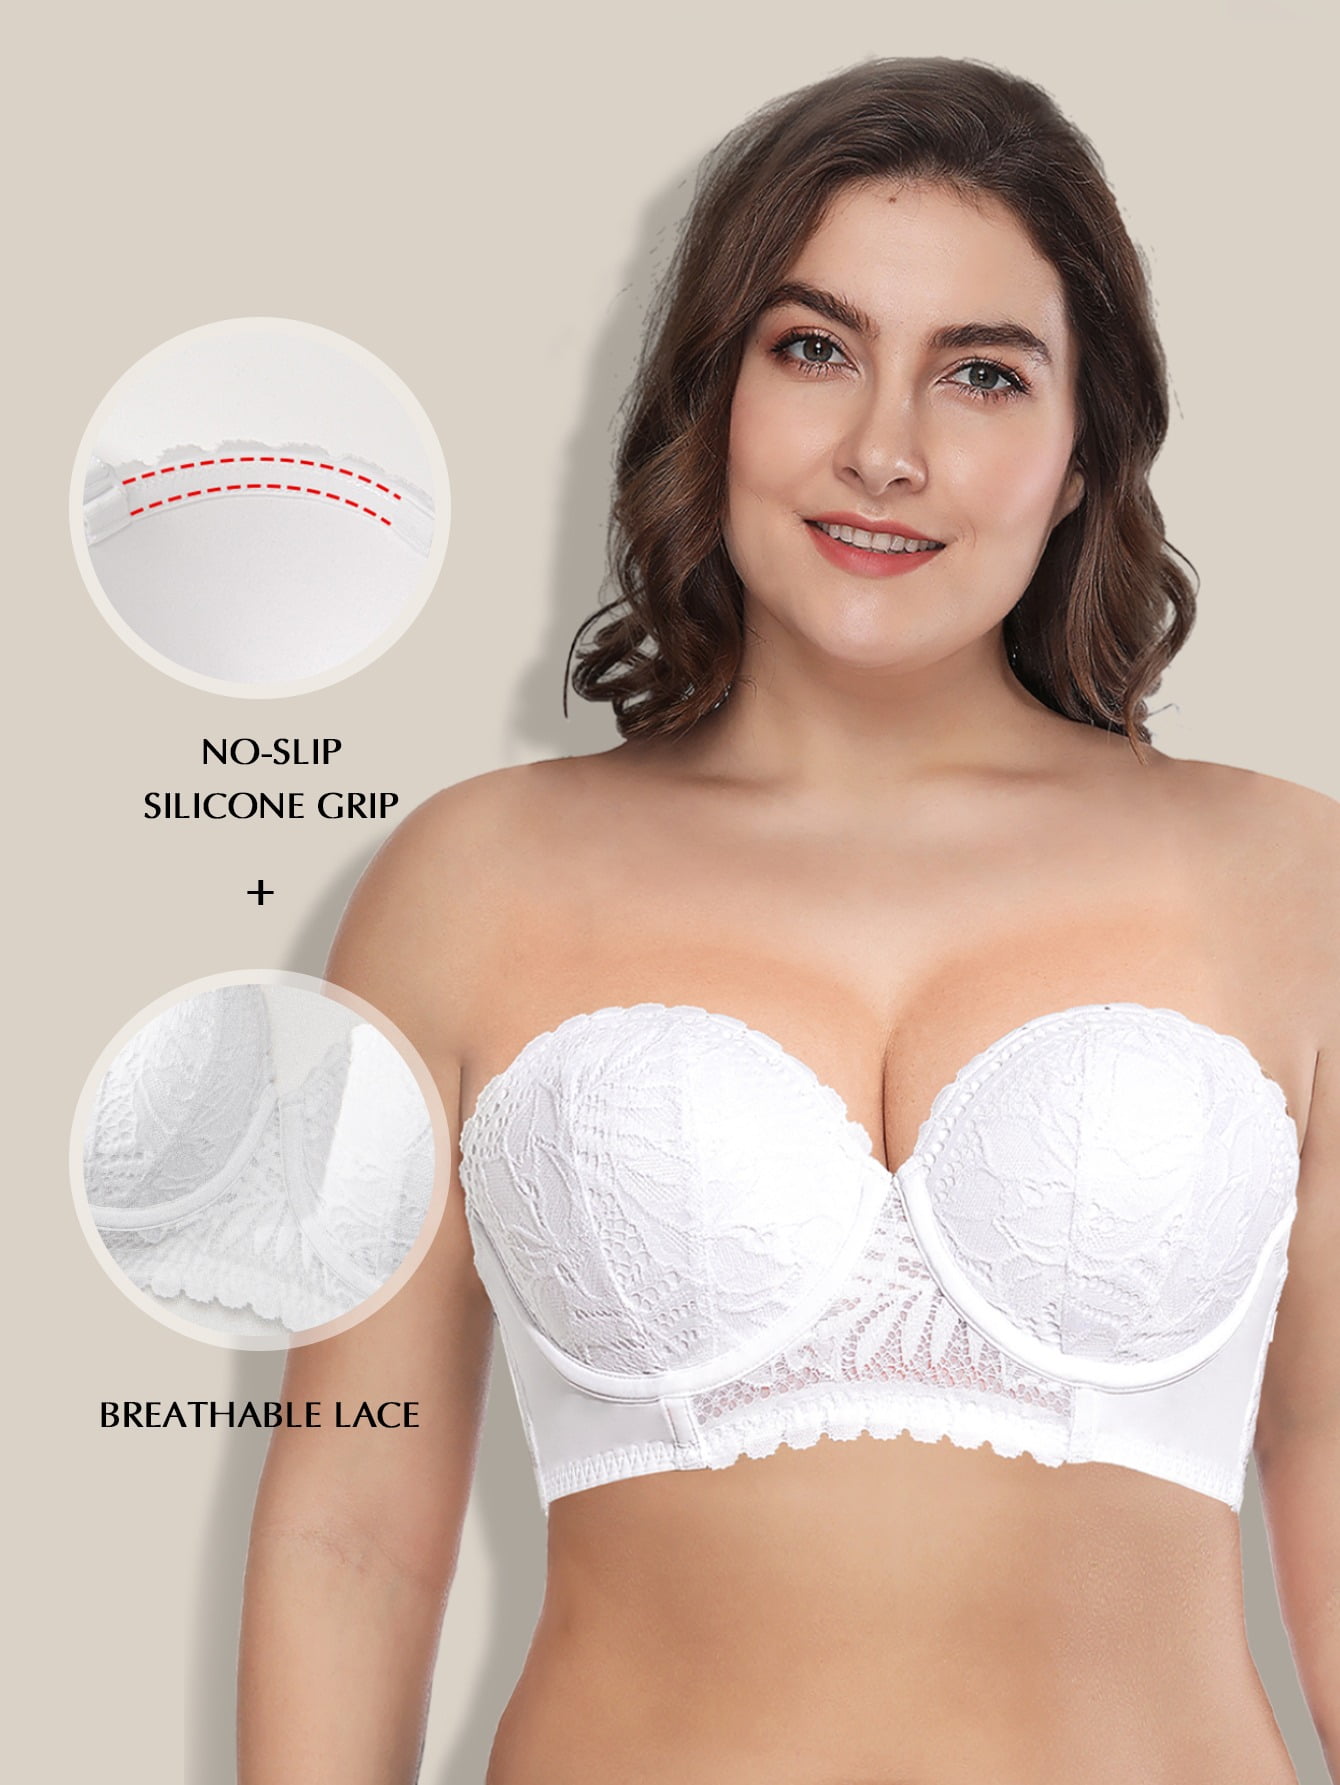  Womens Strapless Bra Silicone-Free Minimizer Bandeau Plus  Size Unlined White 36D